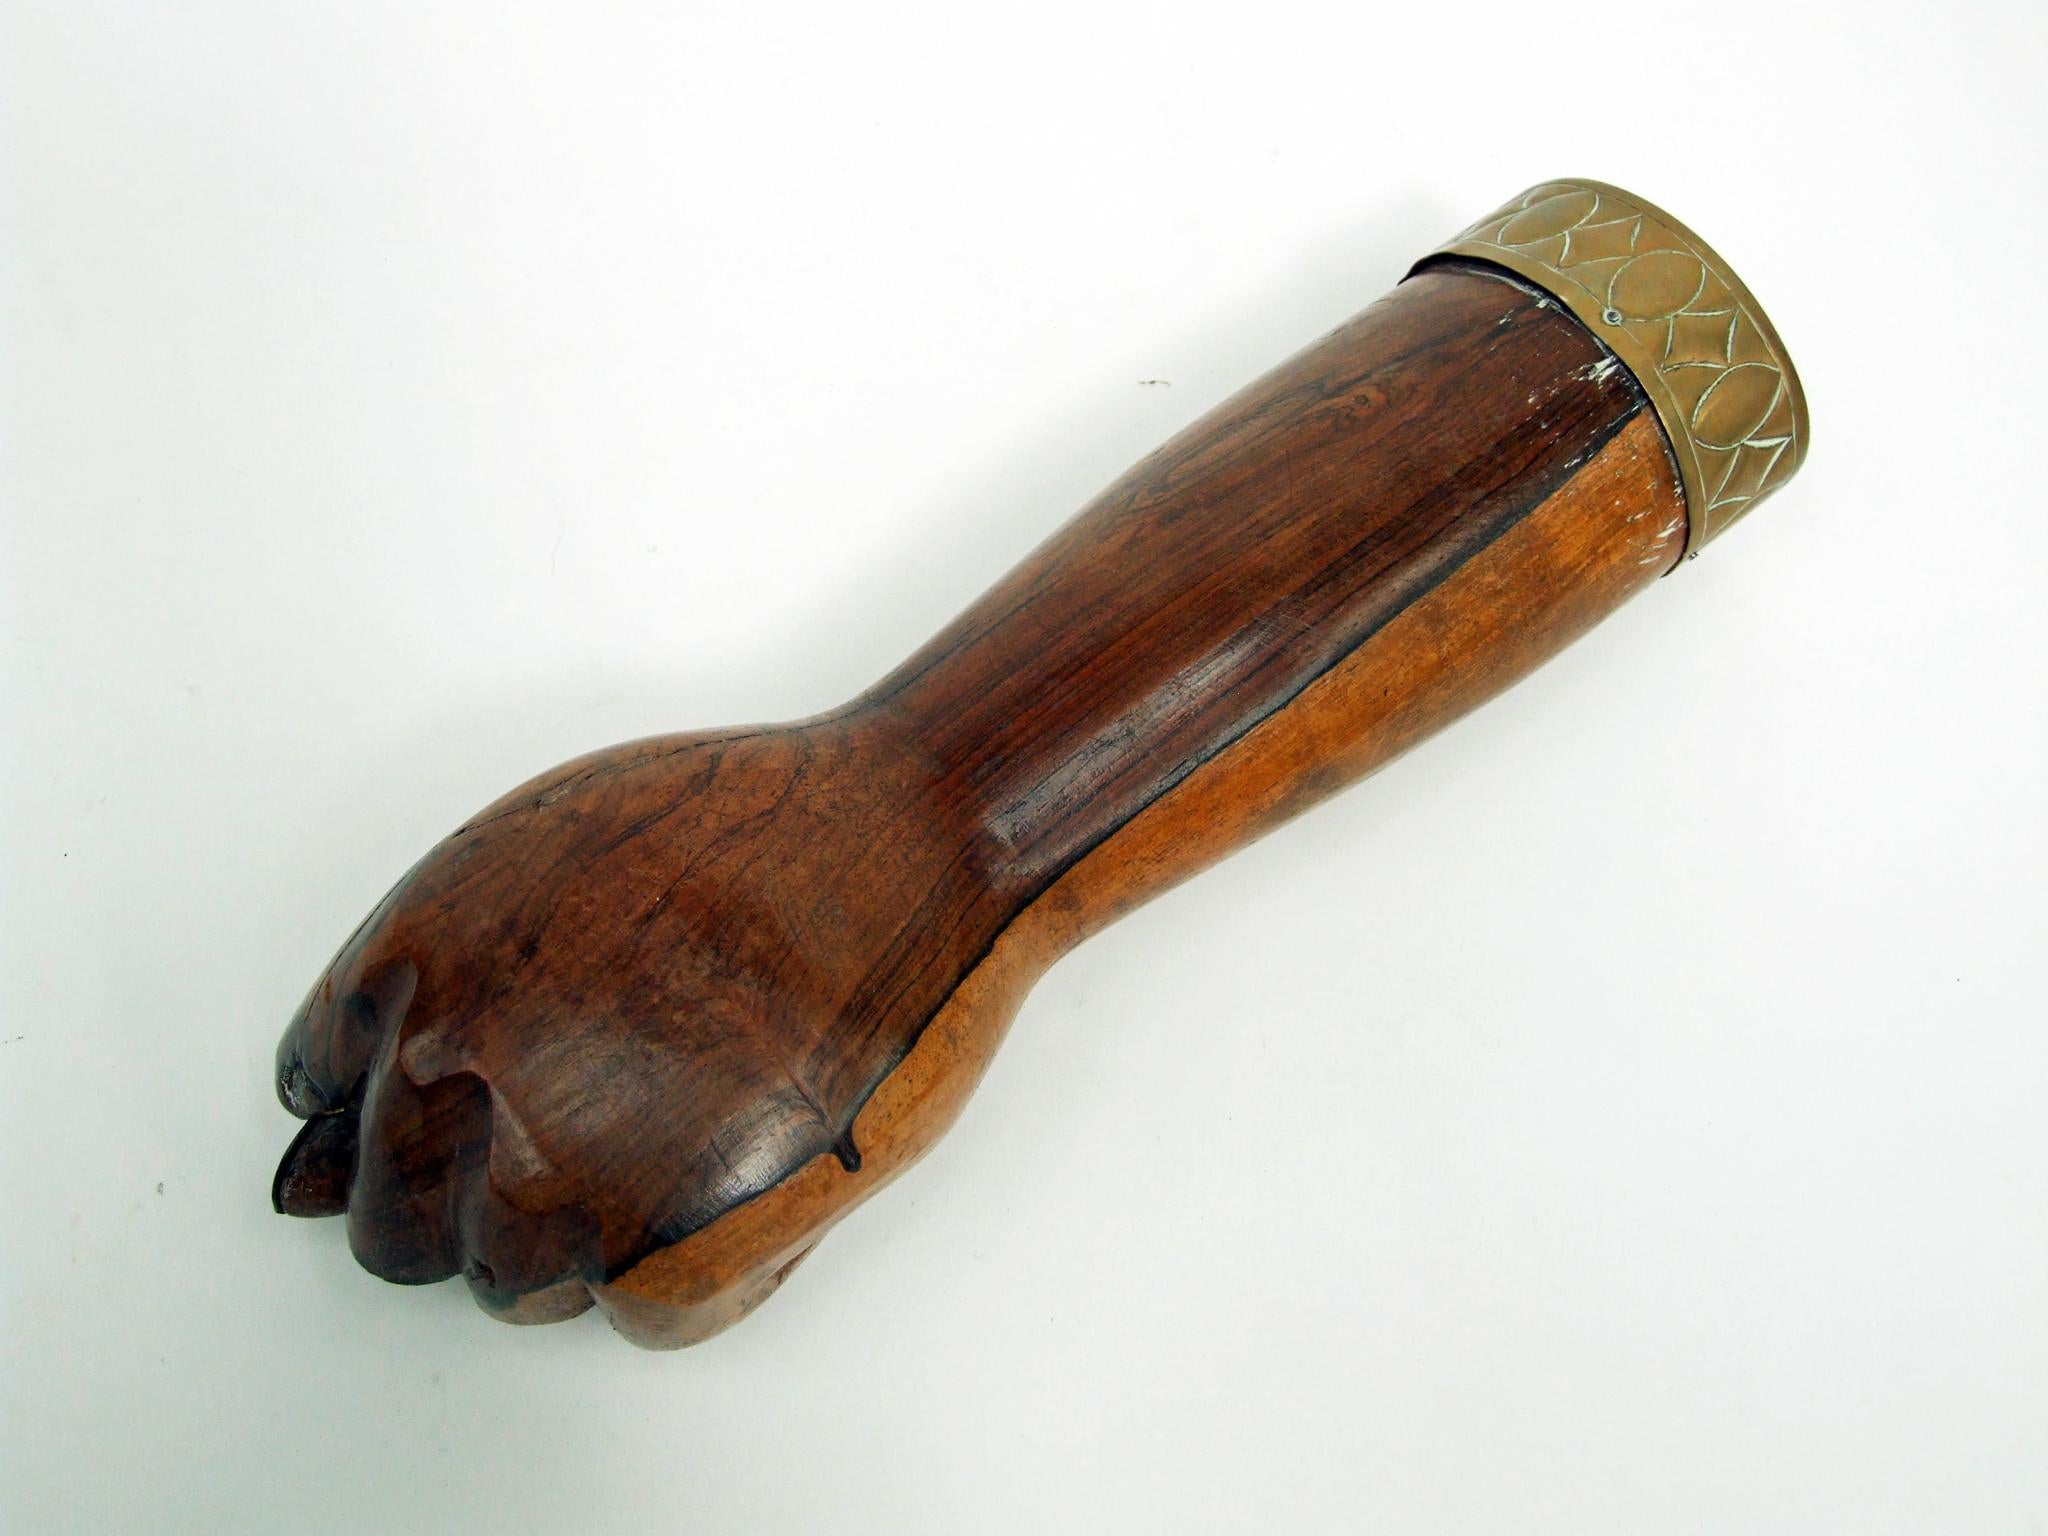 1950s Figa fist sculpture designed and manufactured in Brazil.

Hand carved solid rosewood fist design with brass detail.

Measures: H 6cm x L 28cm x W 7.5cm.